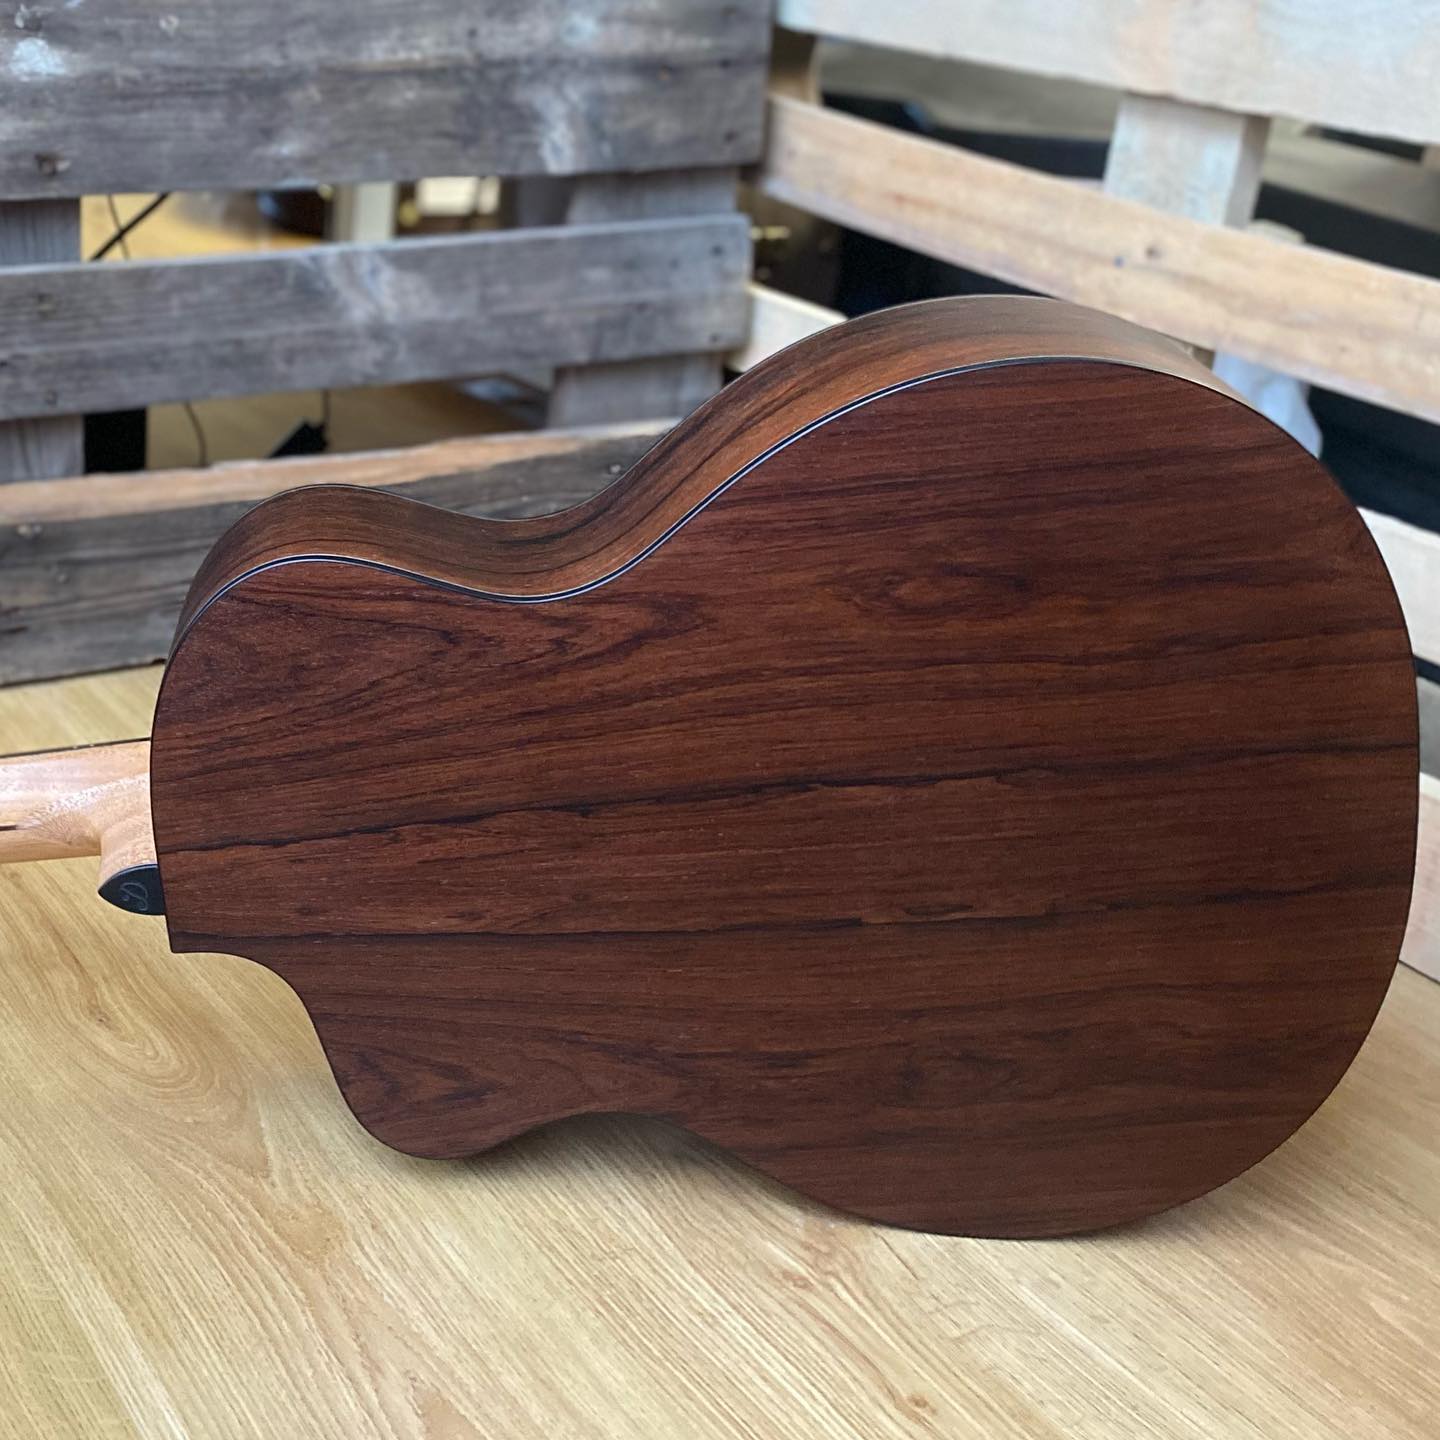 Dowina Guitars Madagascan Rosewood Models Now Available